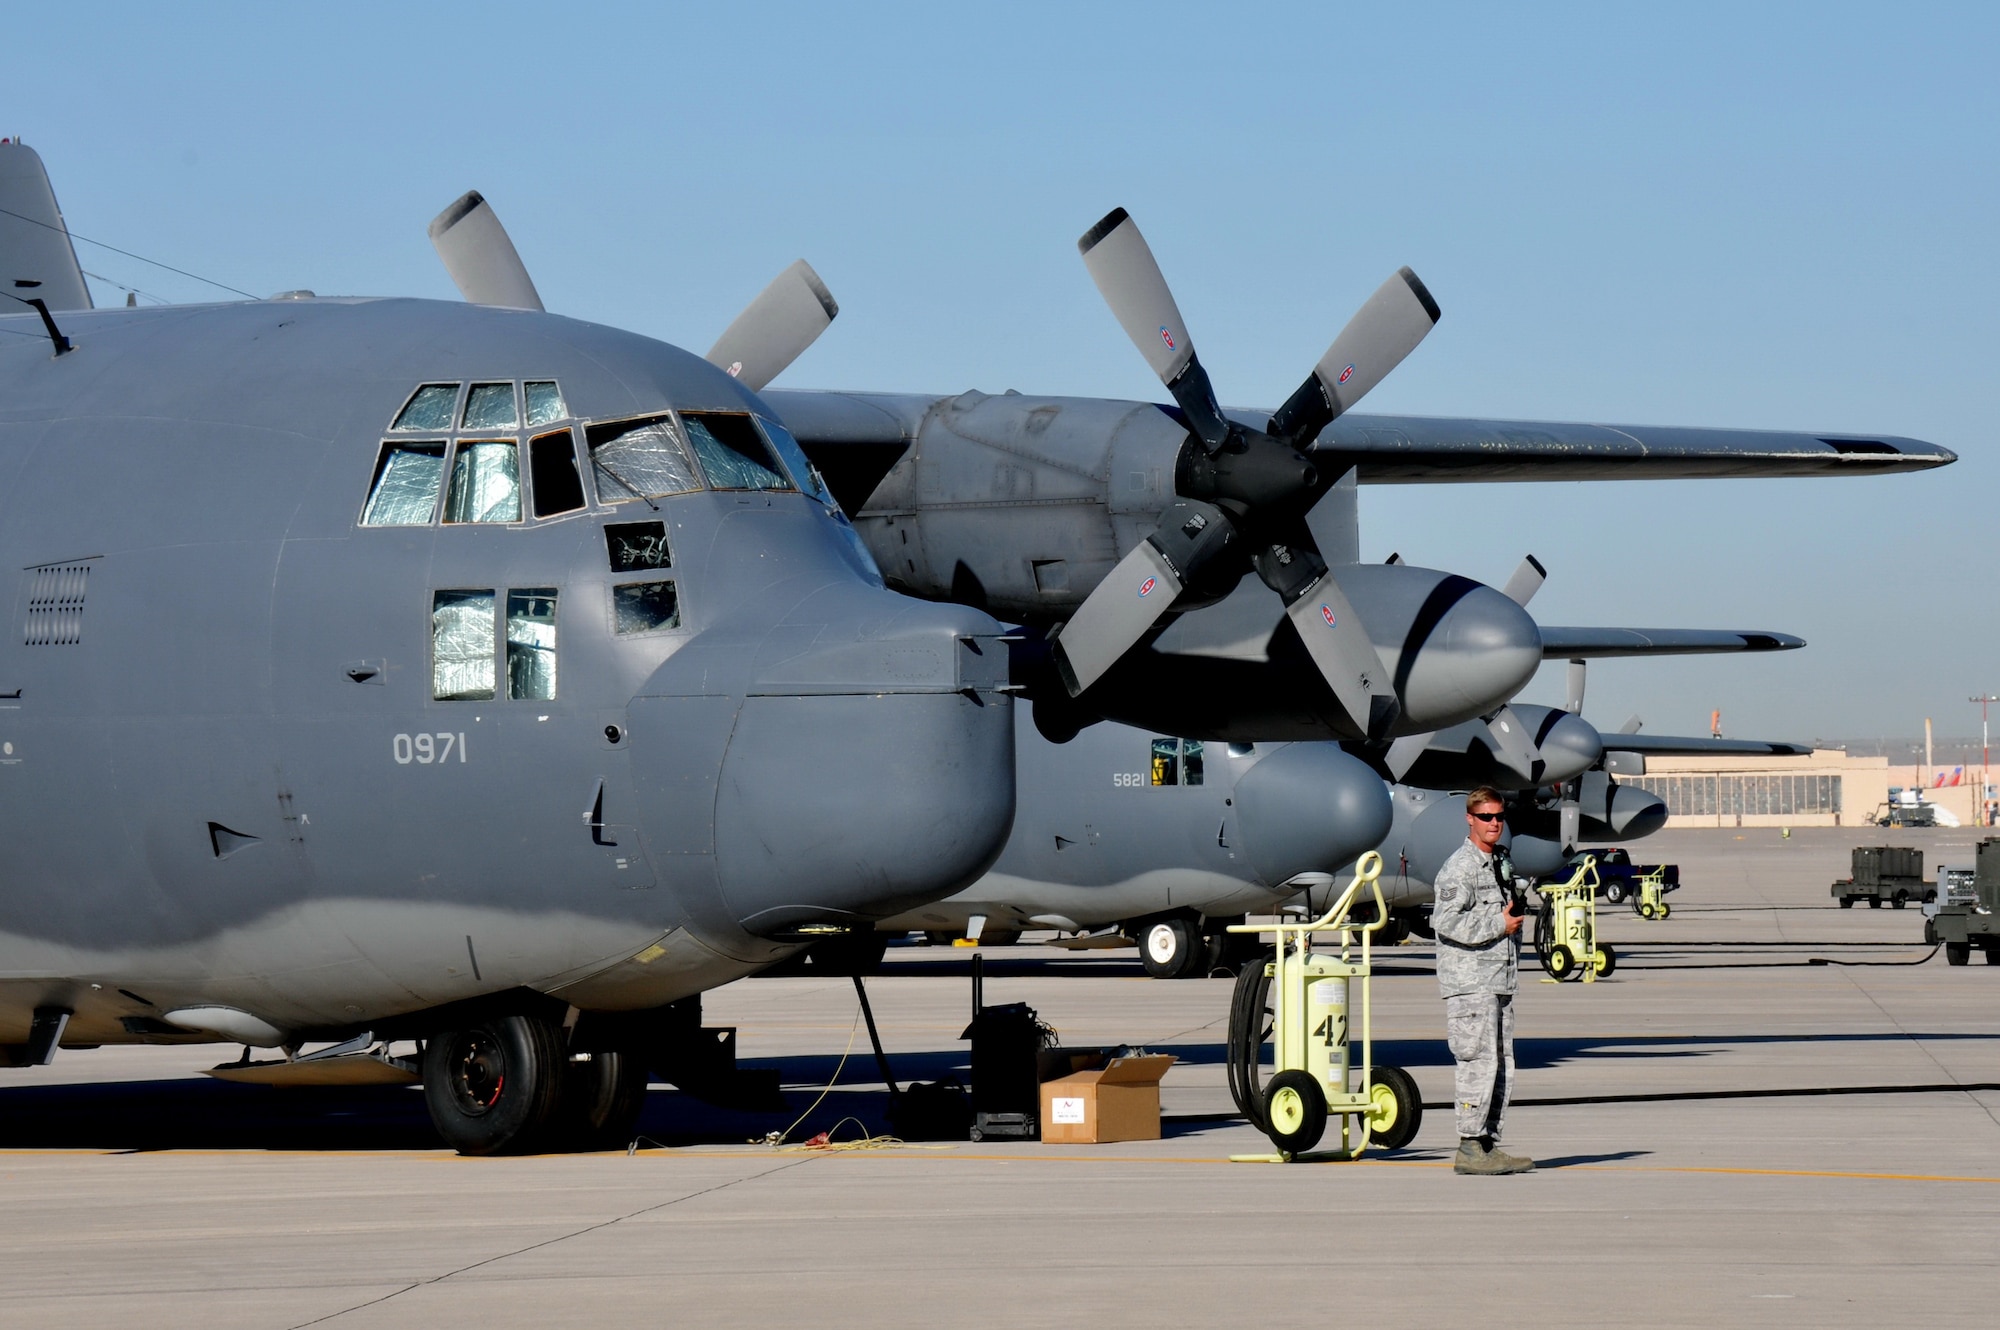 A crew member prepares for the final flight of the last of the 550th Special Operations Squadron's two assigned MC-130Ps Combat Shadows at an informal ceremony Sept. 6.  The departure of the aircraft marks the end of a 25-year training curriculum at Kirtland. (Photo by Ken Moore)